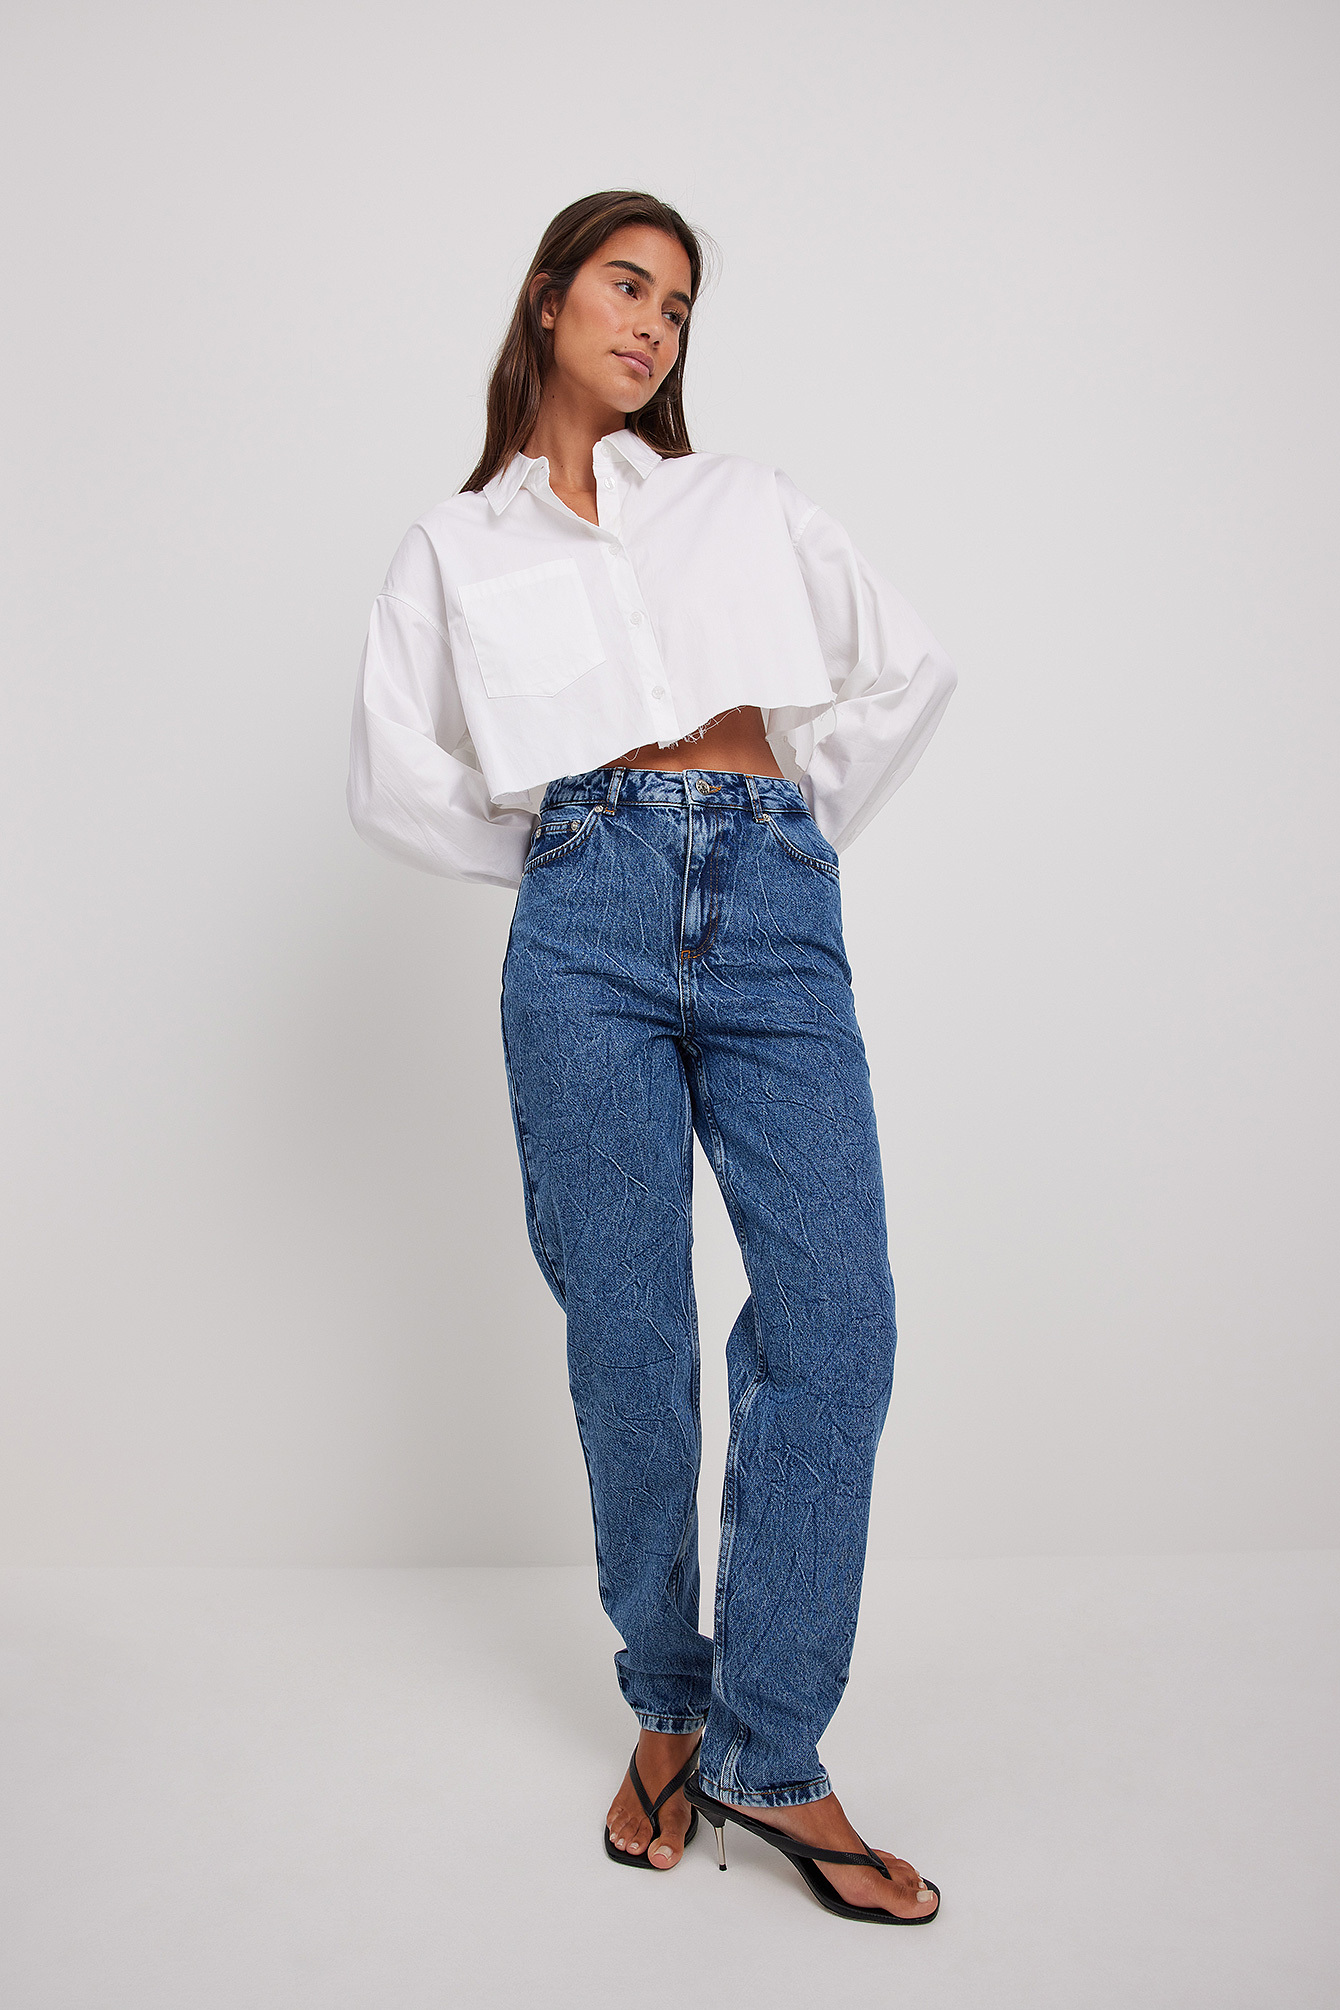 Slim Long Mom Jeans Outfit